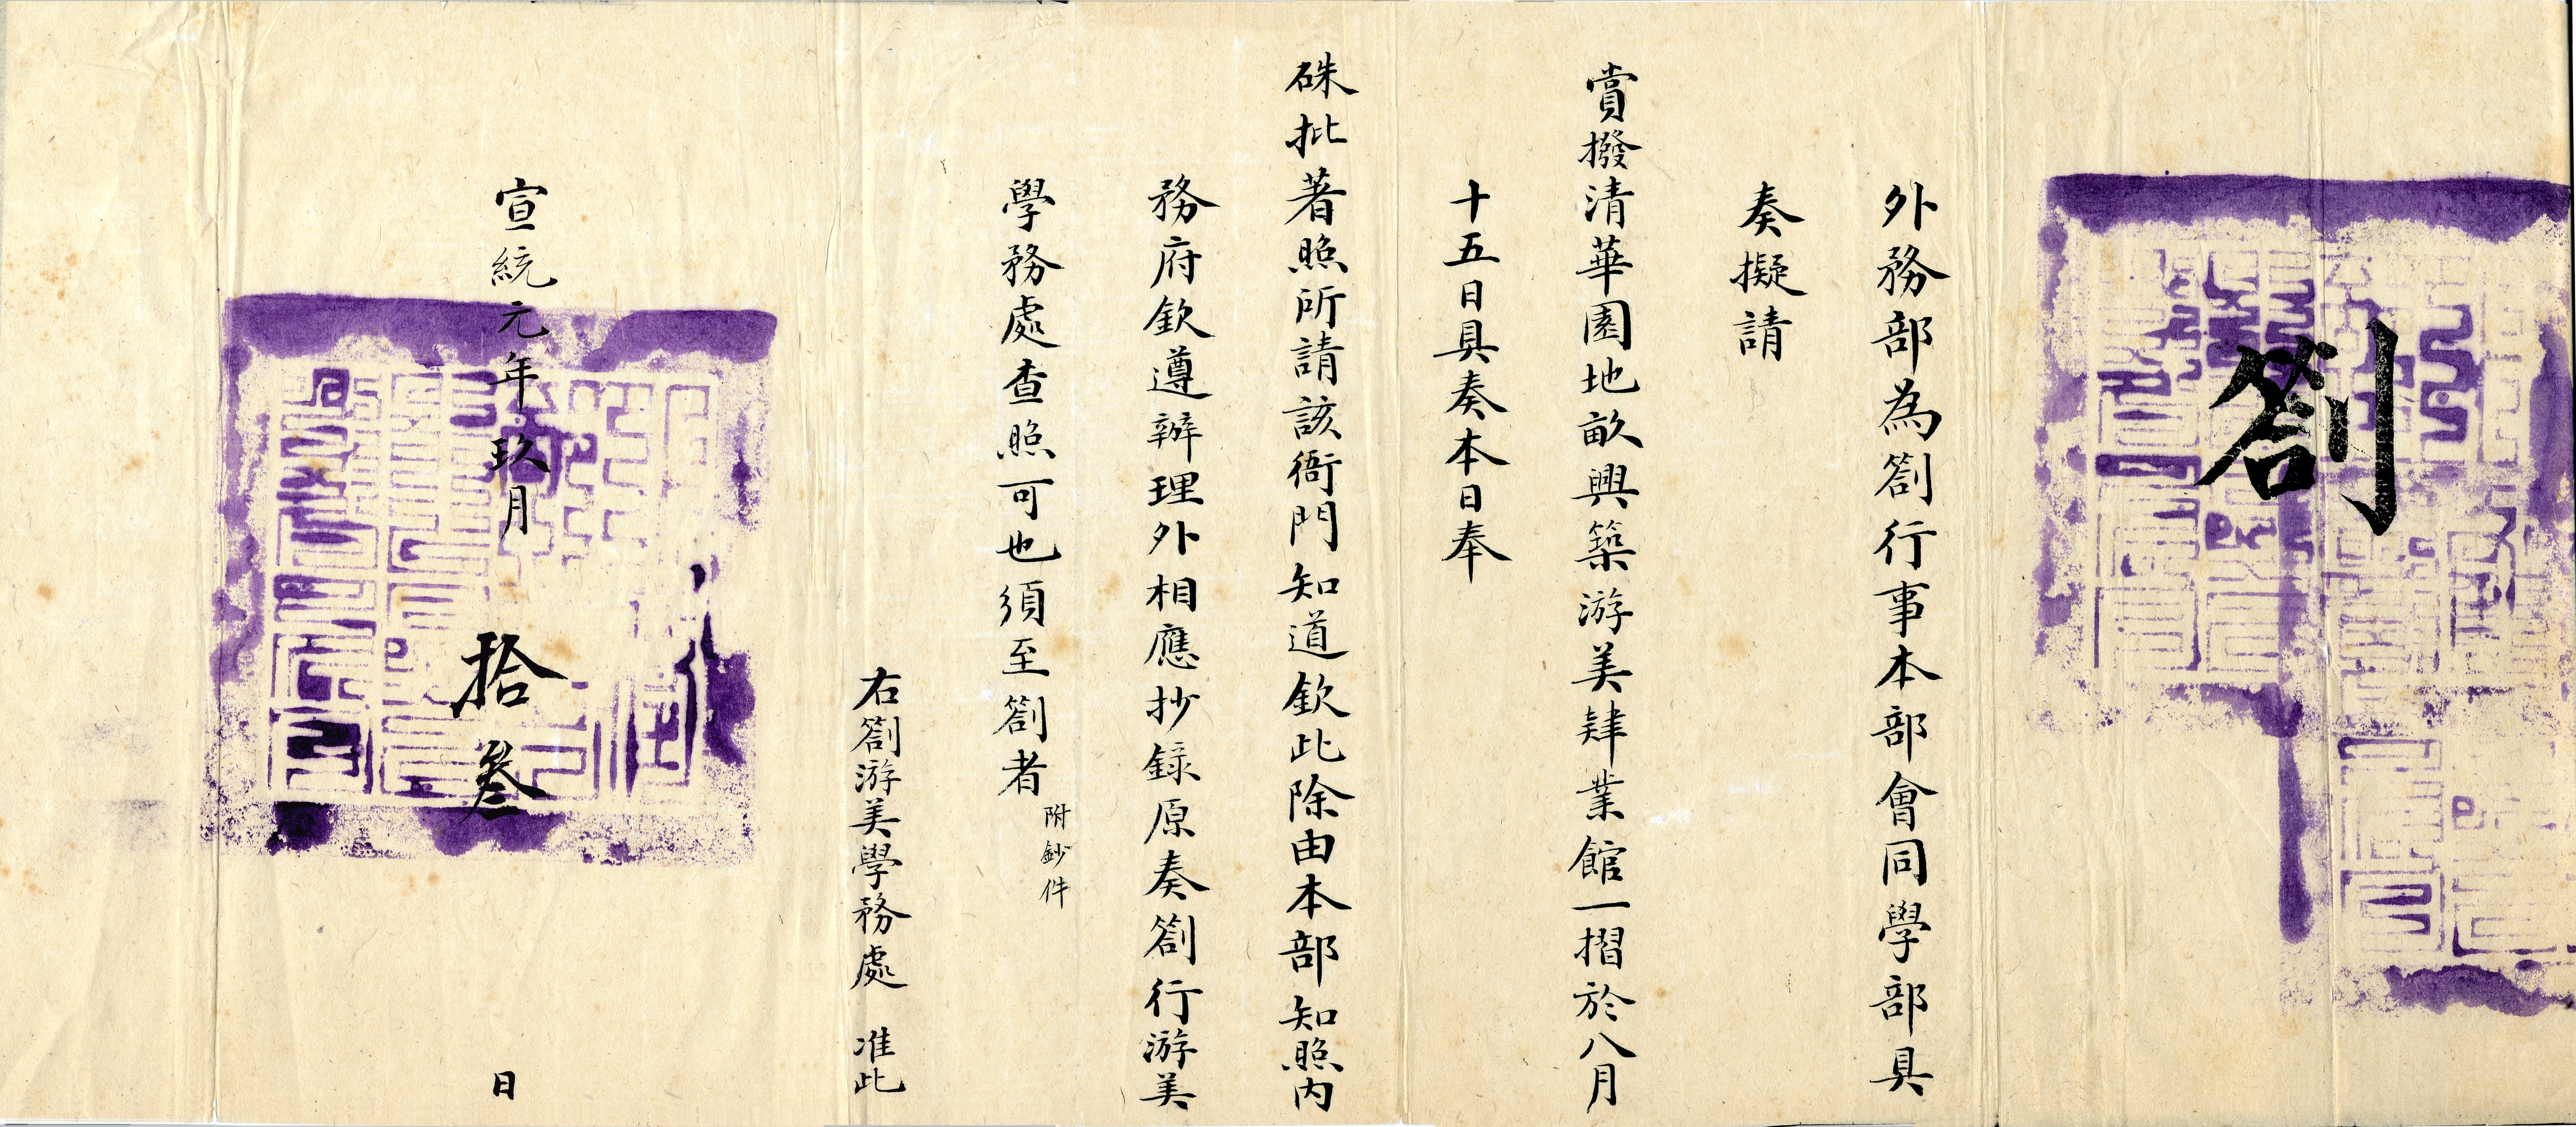 Directive approving the funding to establish the Preparatory School for Students to Study in the U.S. in Tsinghua Garden, with remarks in red ink, 26 October 1909 Tsinghua University History Museum collection